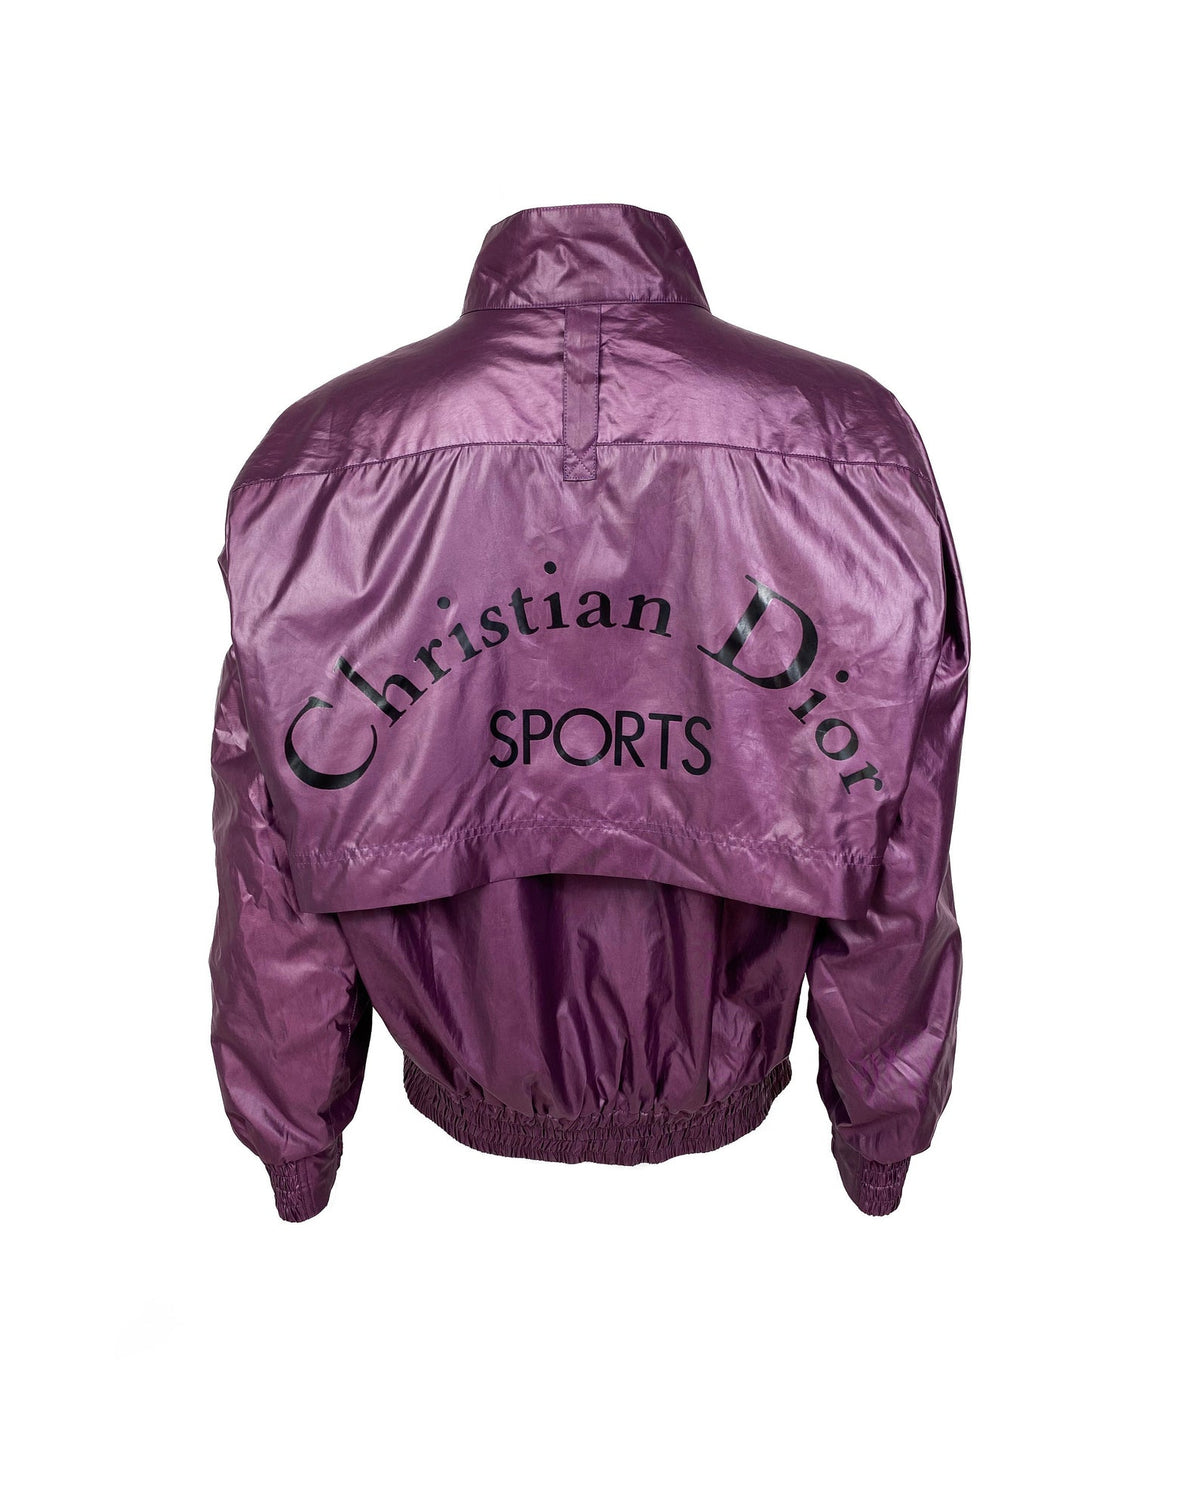 FRUIT Vintage rare Purple Christian Dior Sport Logo bomber jacket from the 1980s. It features a classic 1980s bomber jacket cut with over flap and large Christian Dior Sport text logo printed at rear.